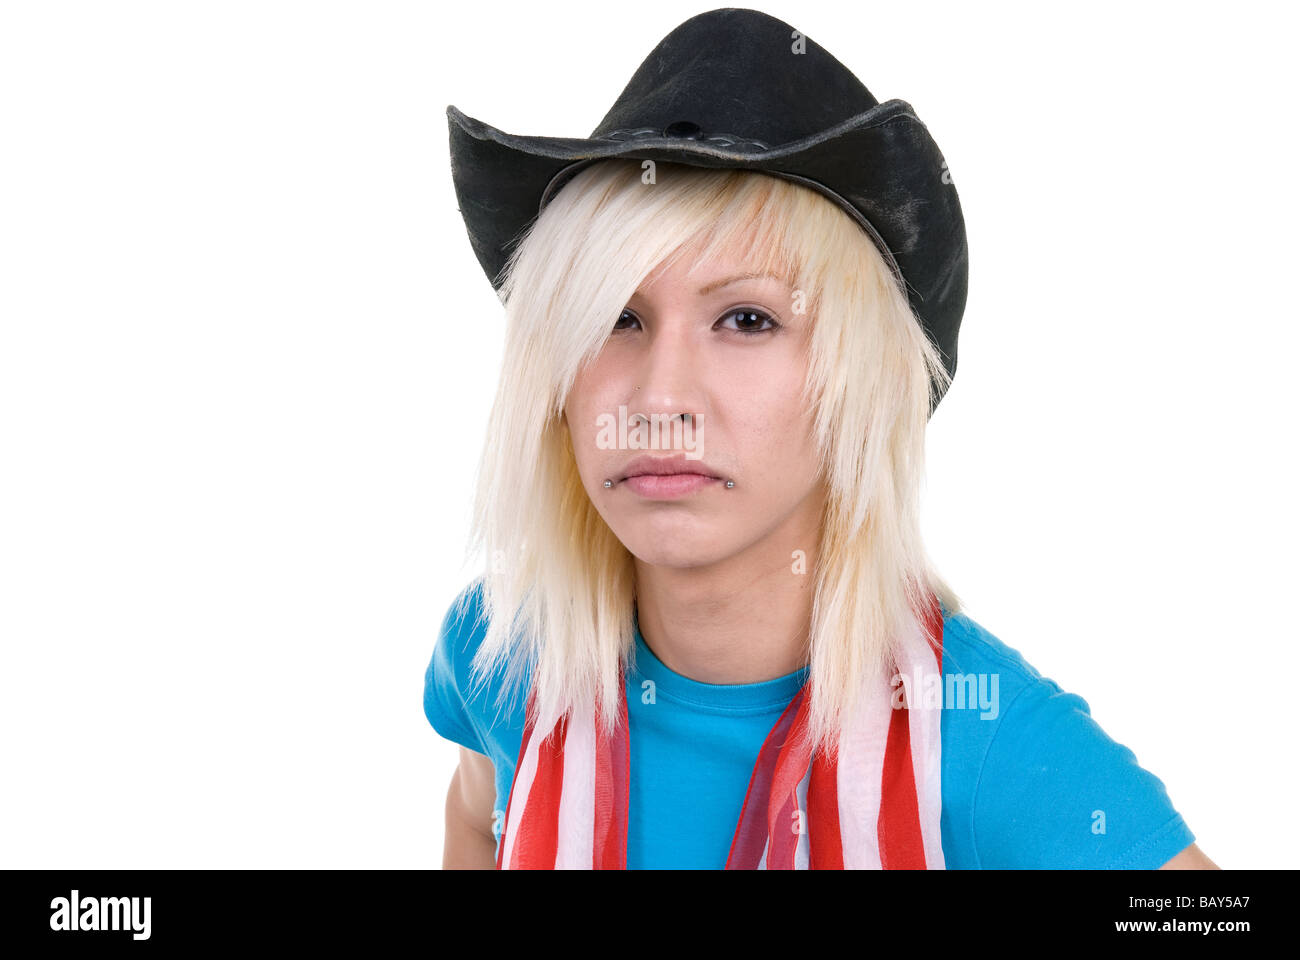 A young man expresses himself through his clothing and piercings Stock Photo